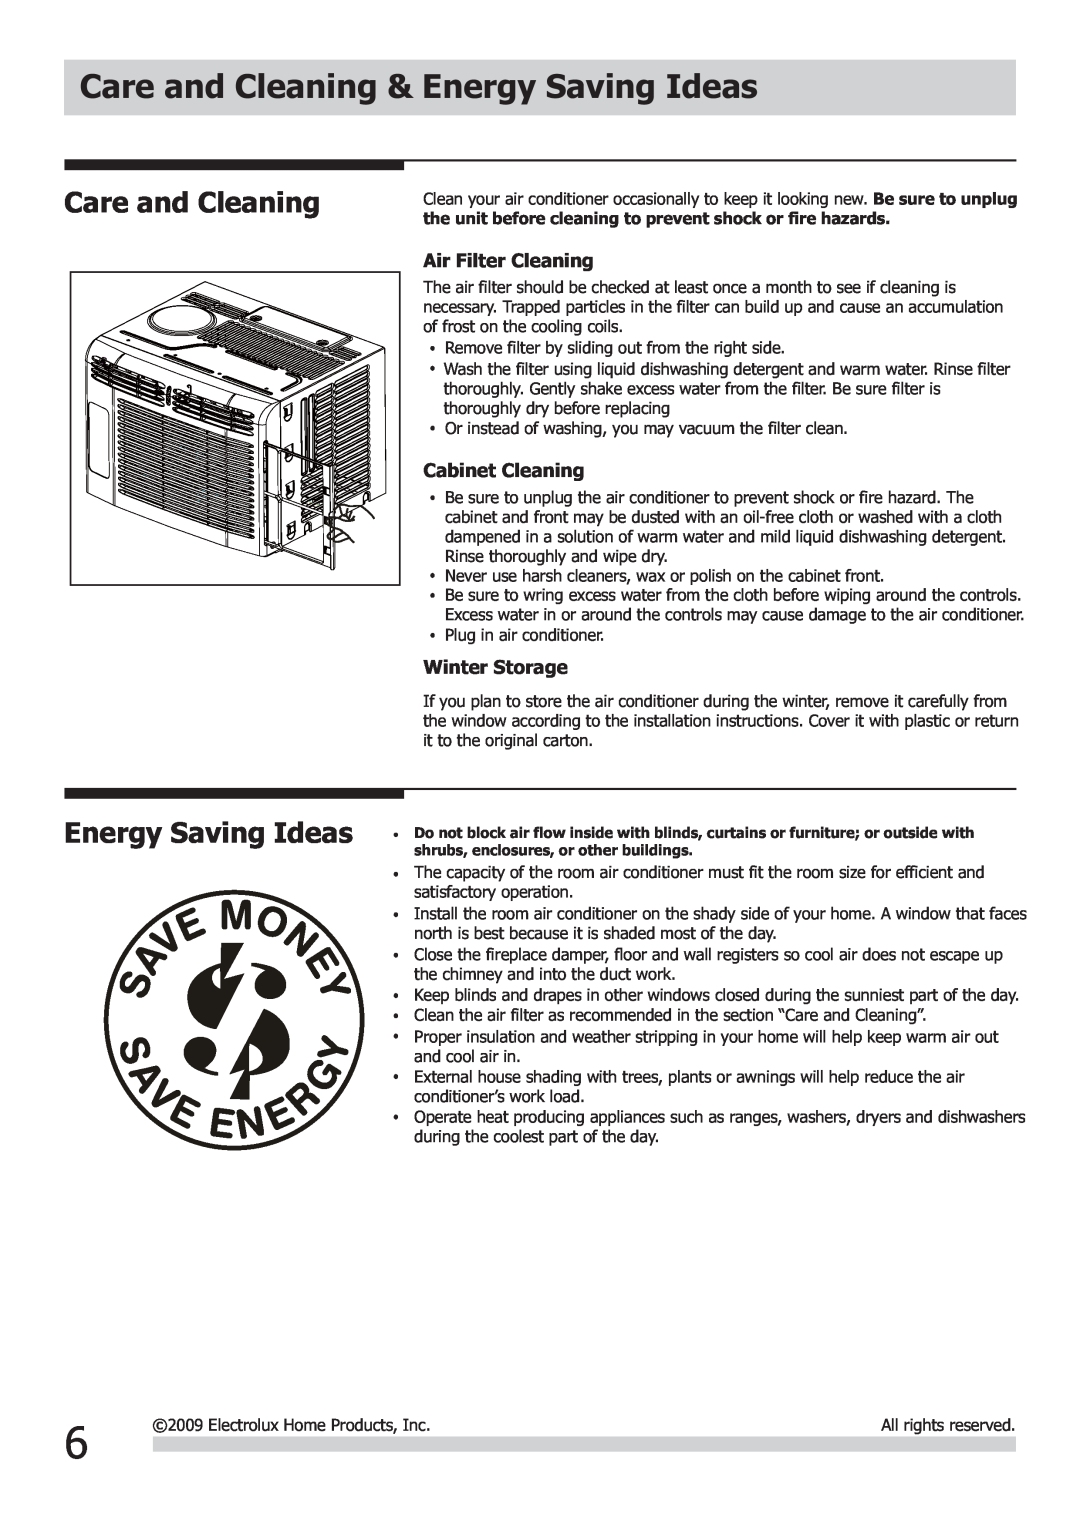 Frigidaire FRA053XT7 Care and Cleaning & Energy Saving Ideas, Air Filter Cleaning, Cabinet Cleaning, Winter Storage 